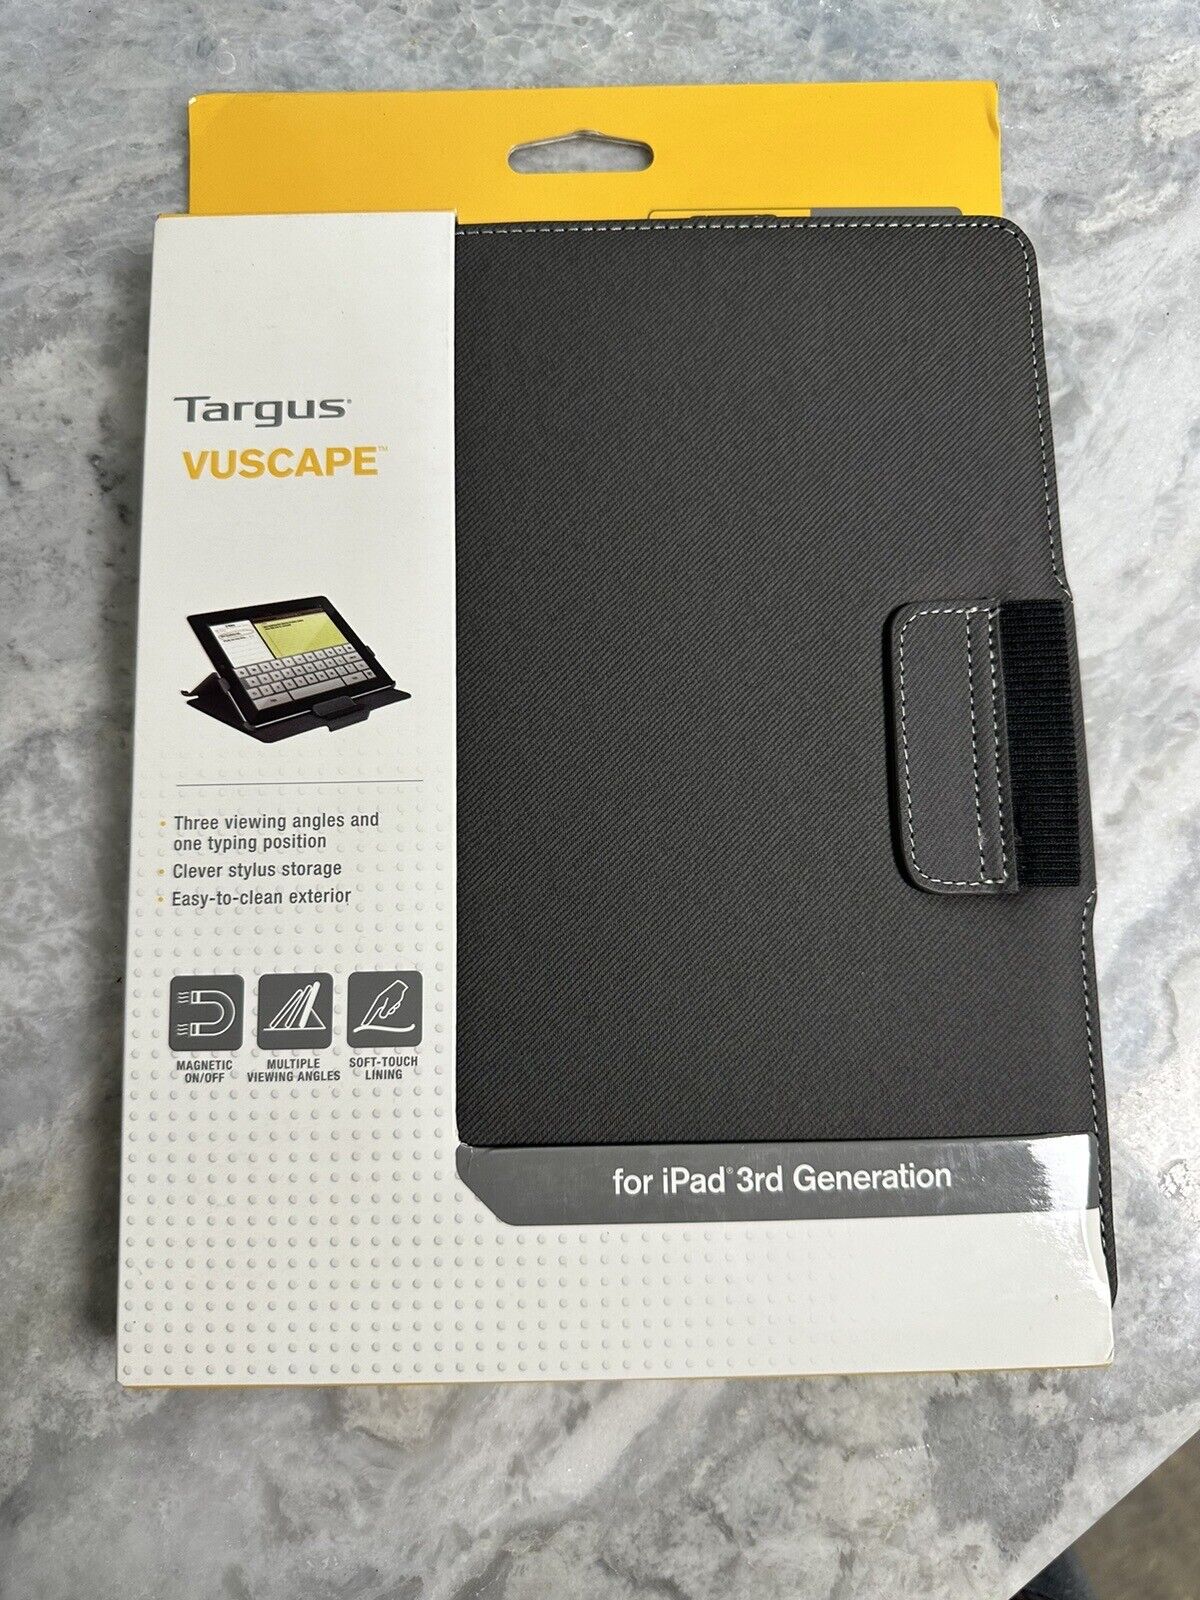 TARGUS VUSCAPE iPad 3rd Generation Case & Stand (New in Packaging) 